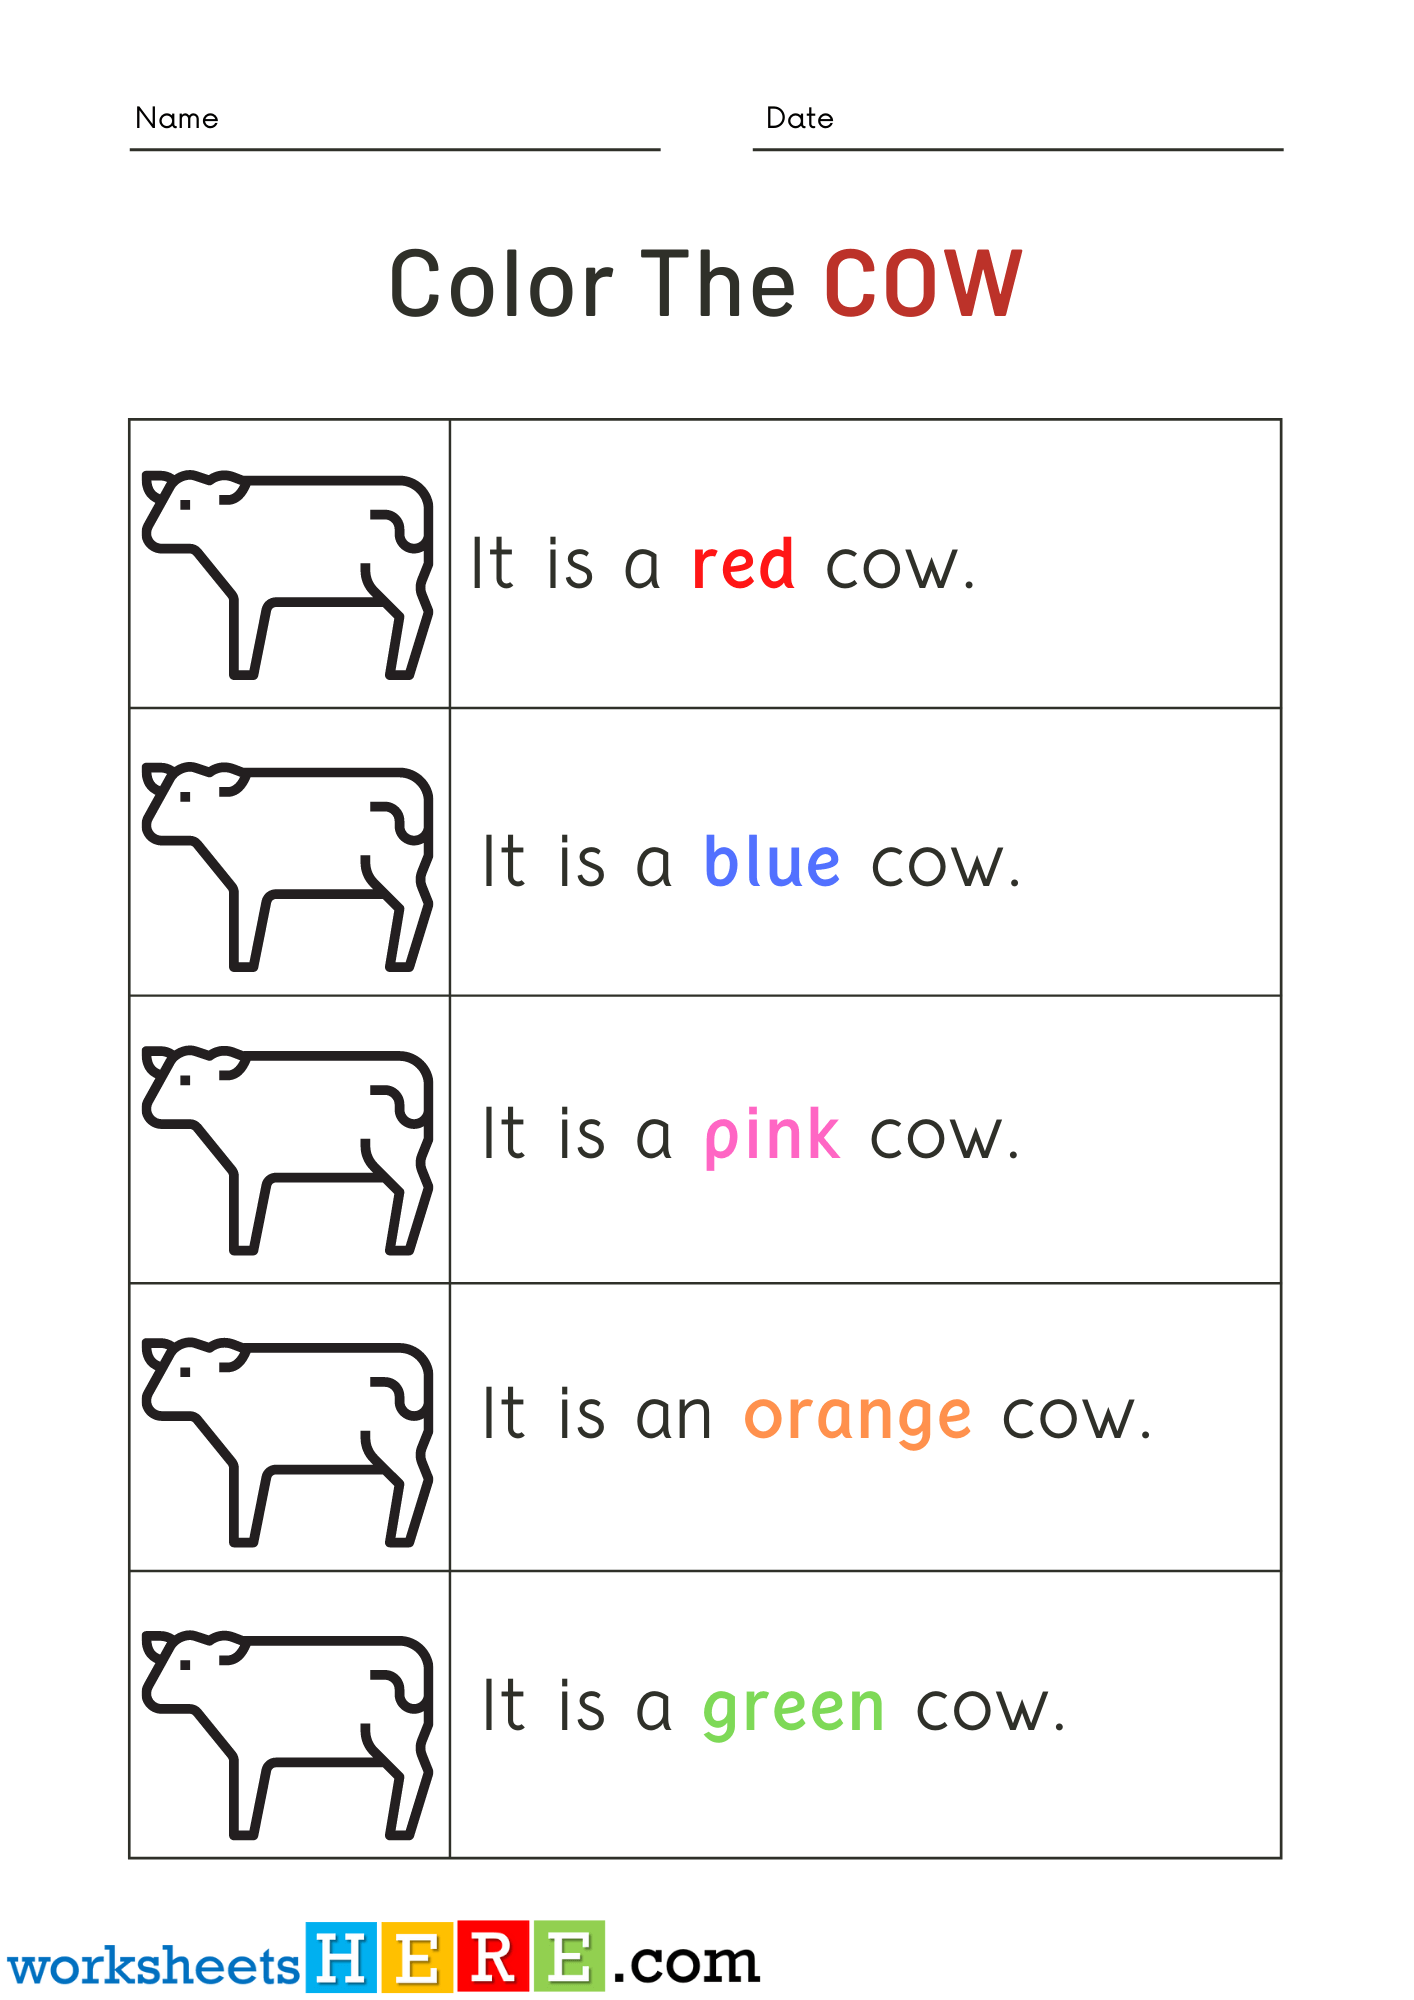 Read Words and Color Cow Pictures Activity PDF Worksheets For Kindergarten